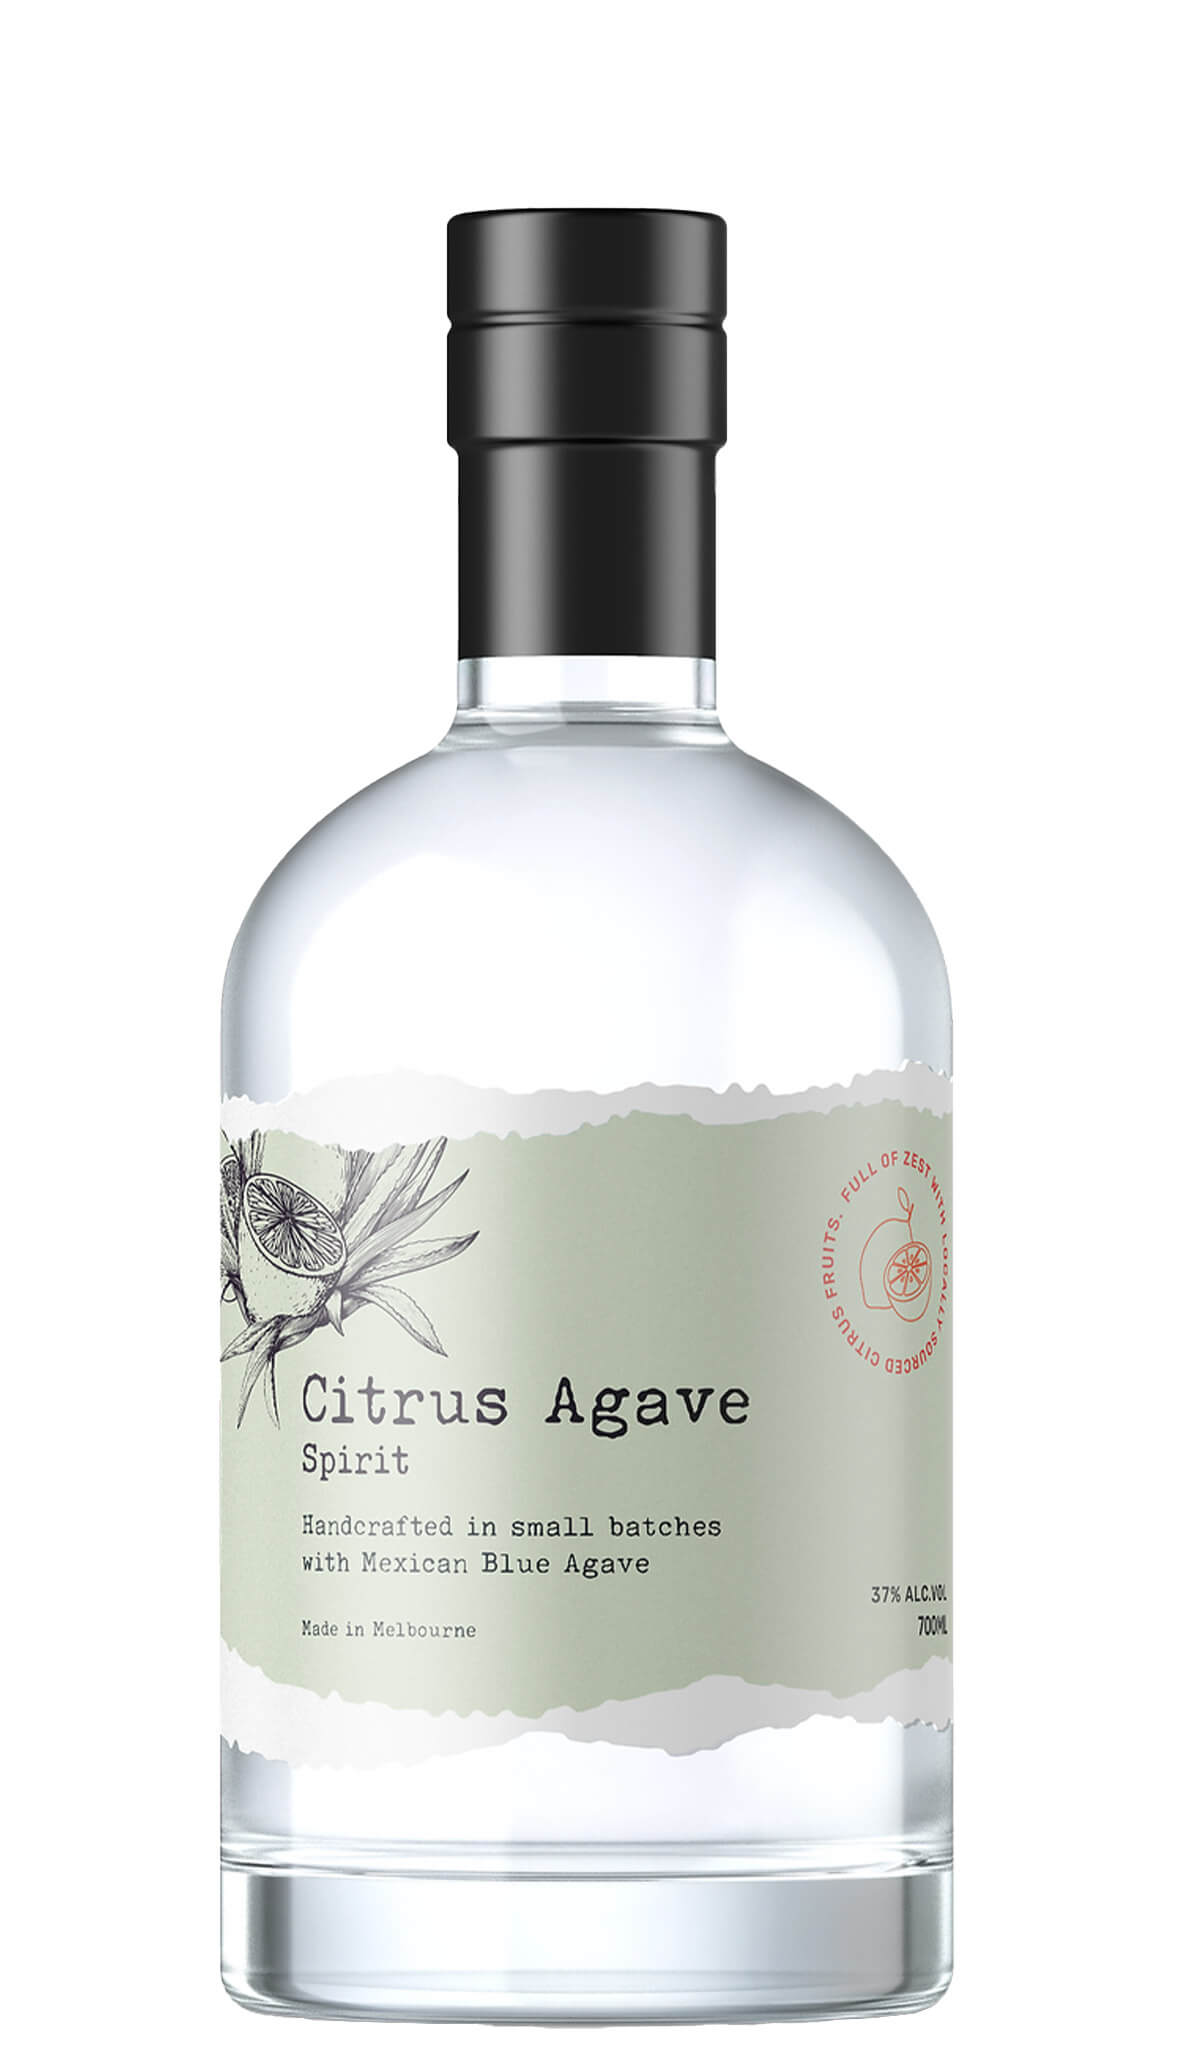 Find out more, explore the range and purchase Imbue Distillery Citrus Agave Spirit 700ml available online at Wine Sellers Direct - Australia's independent liquor specialists.